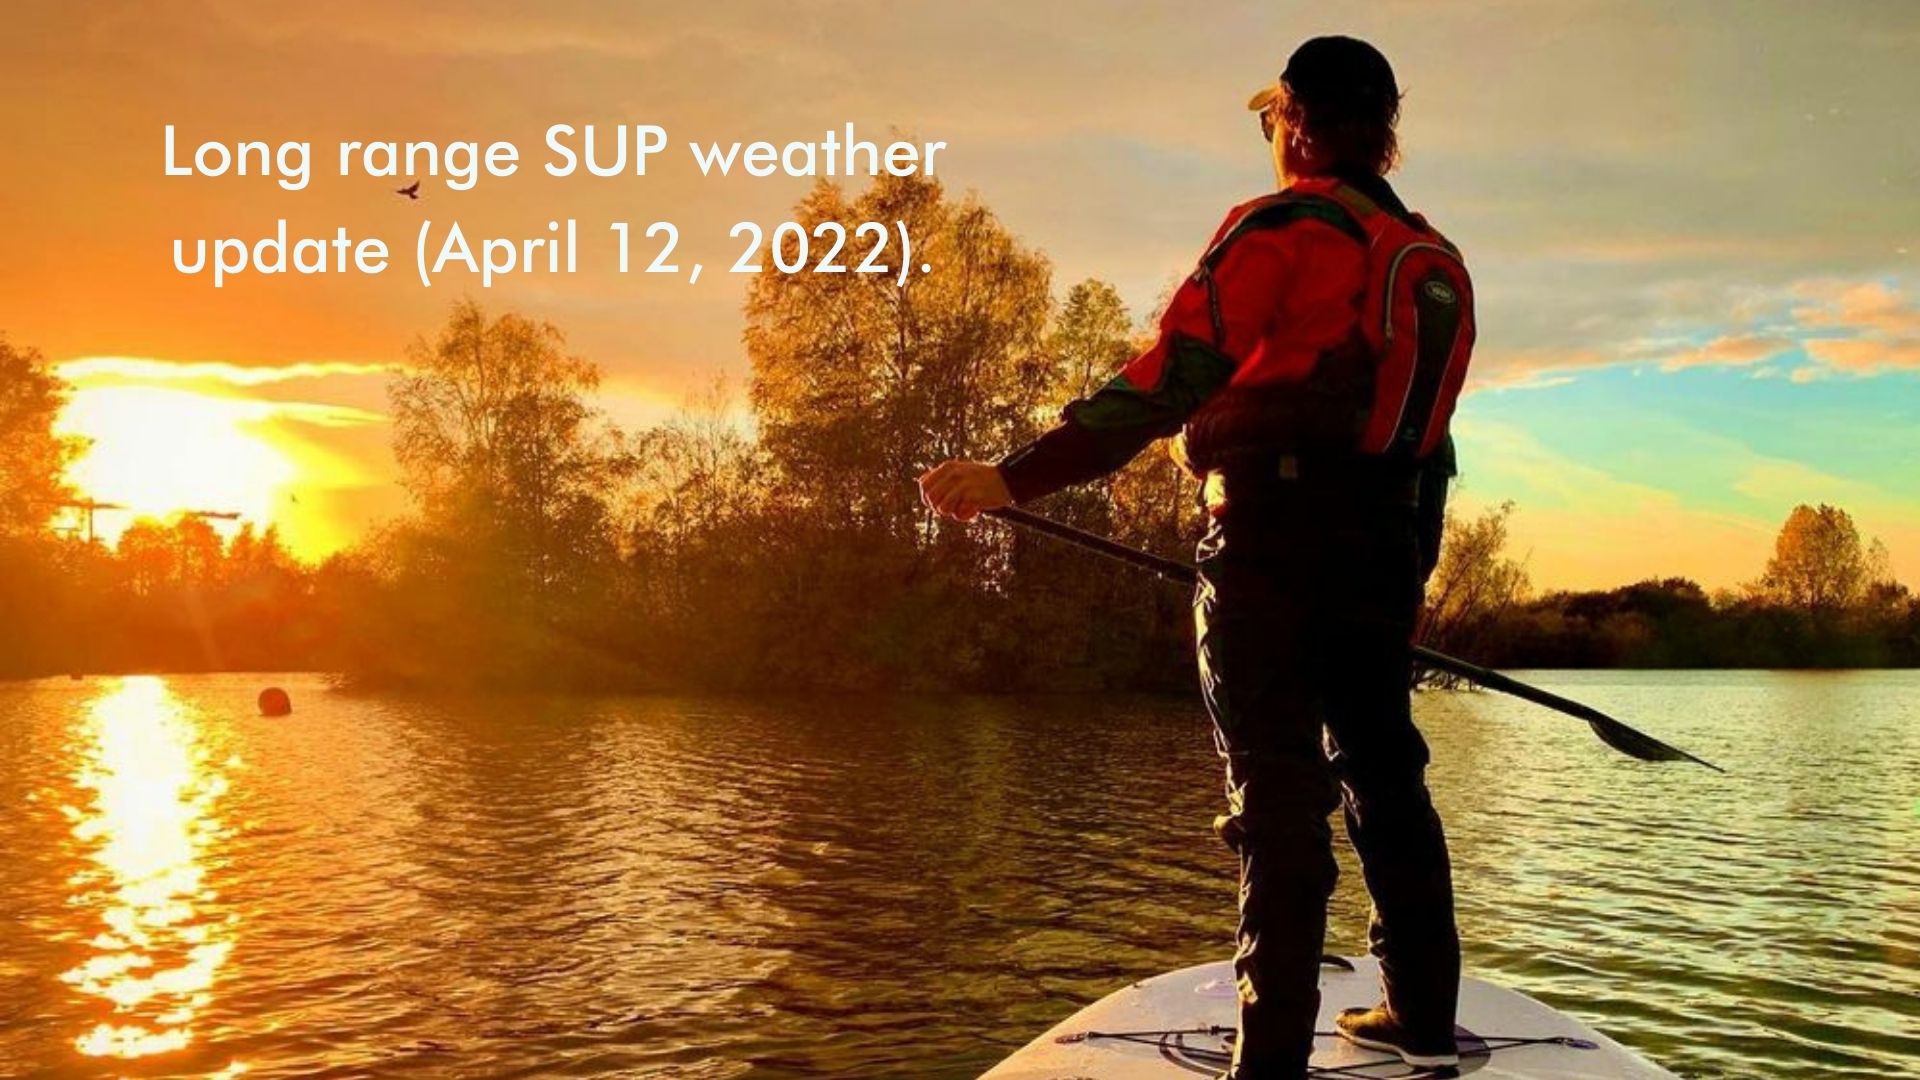 You are currently viewing Long range SUP weather update (April 12, 2022).